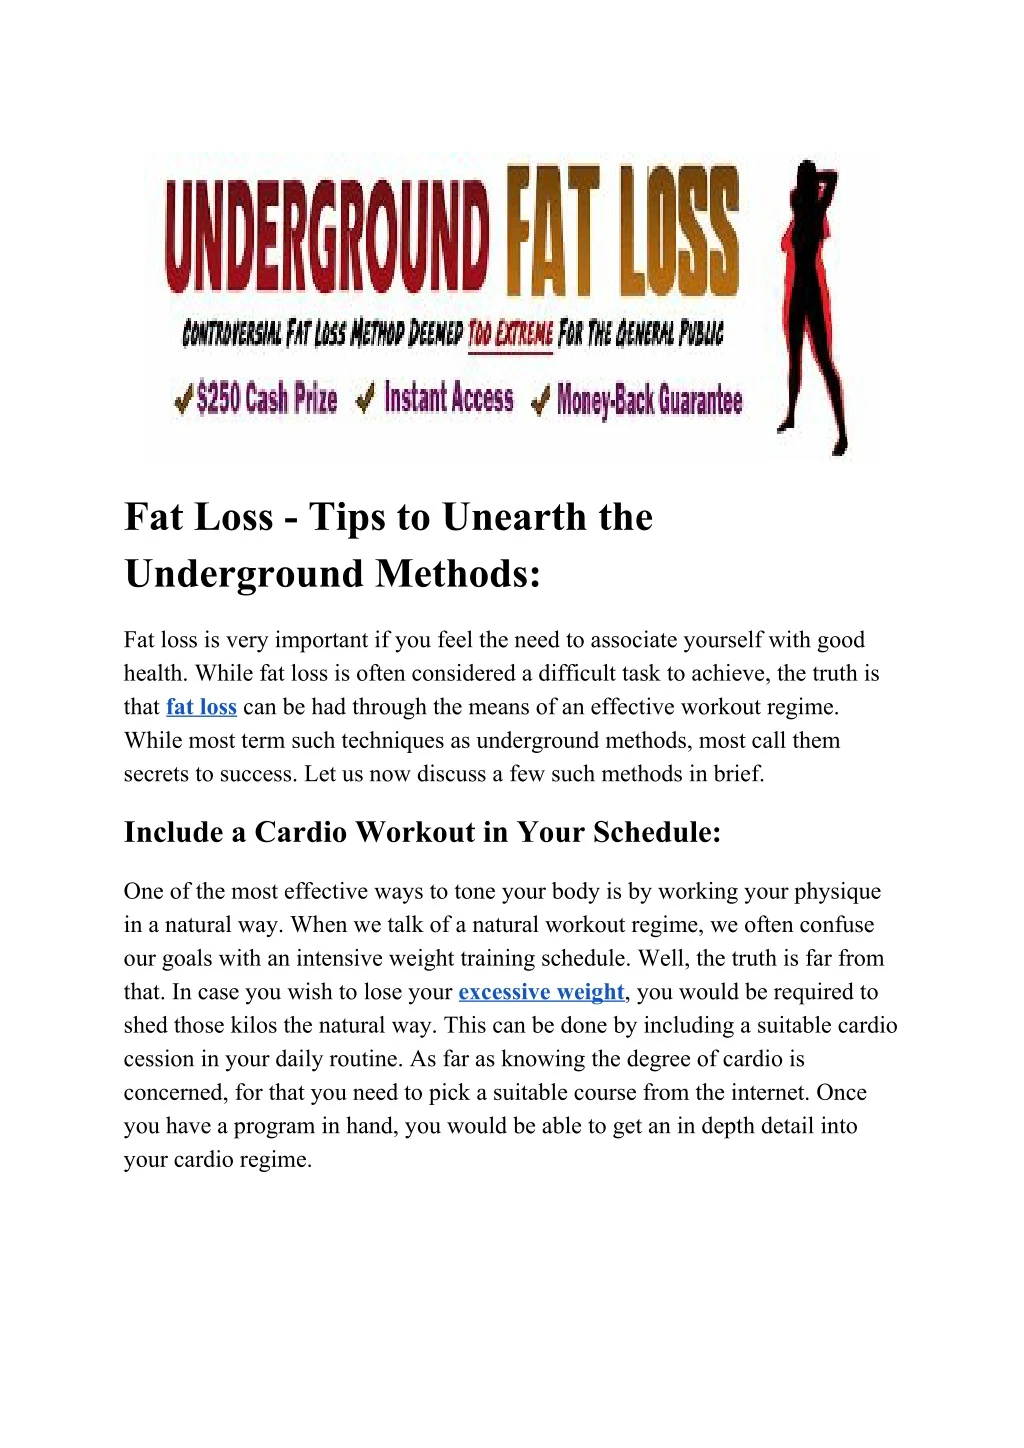 fat loss tips to unearth the underground methods